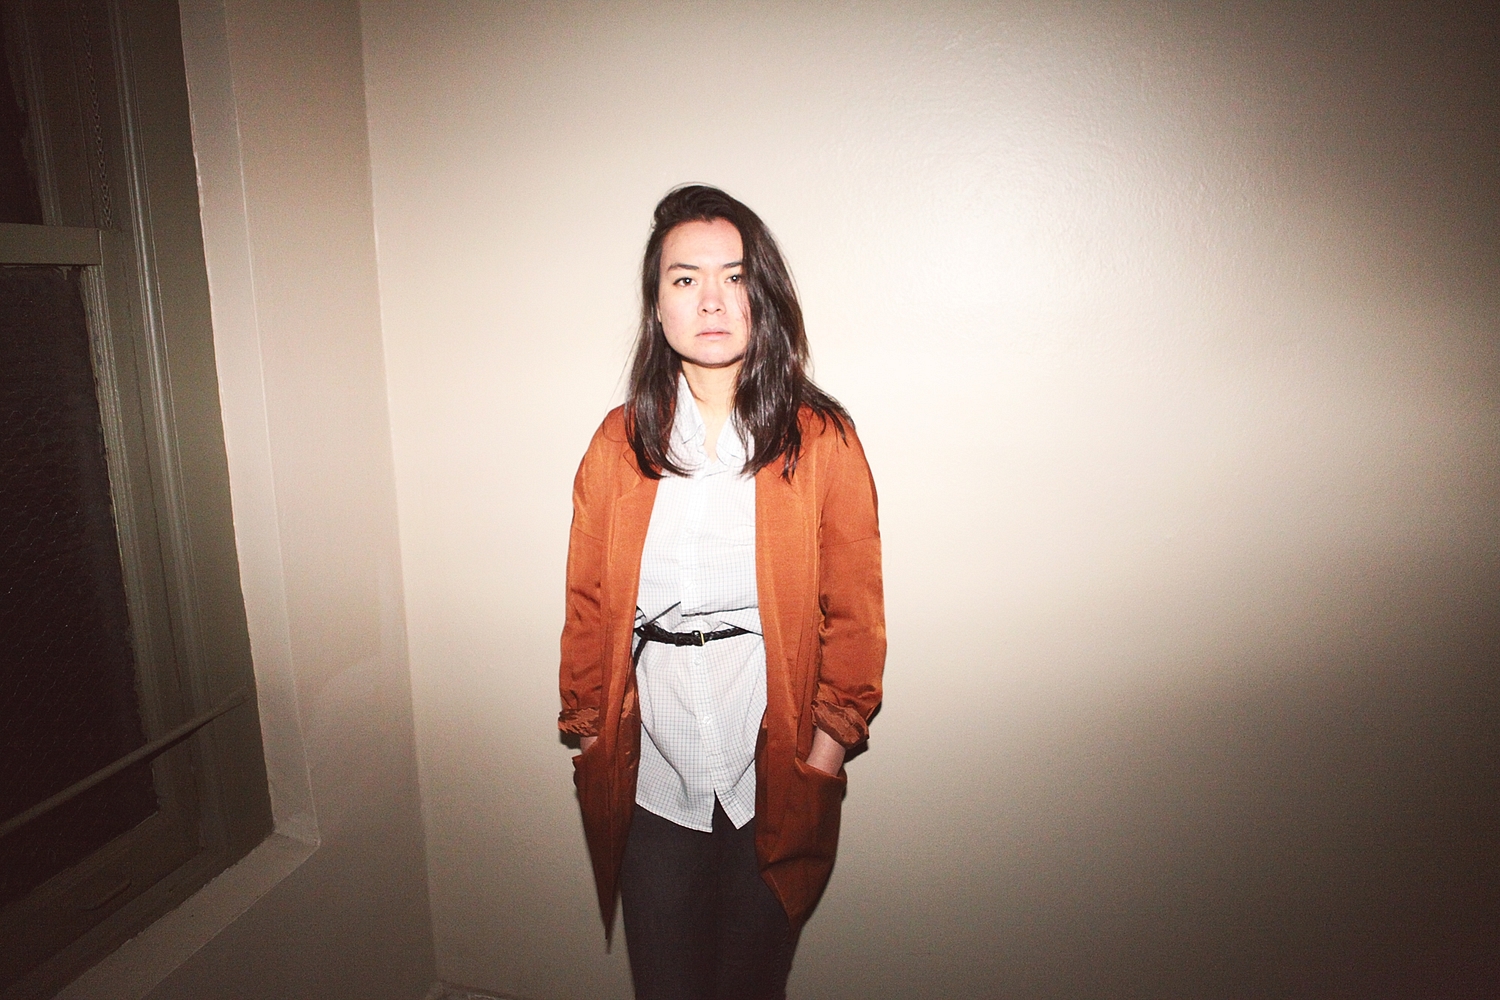 Mitski: “My skills are playing a role in people’s lives”